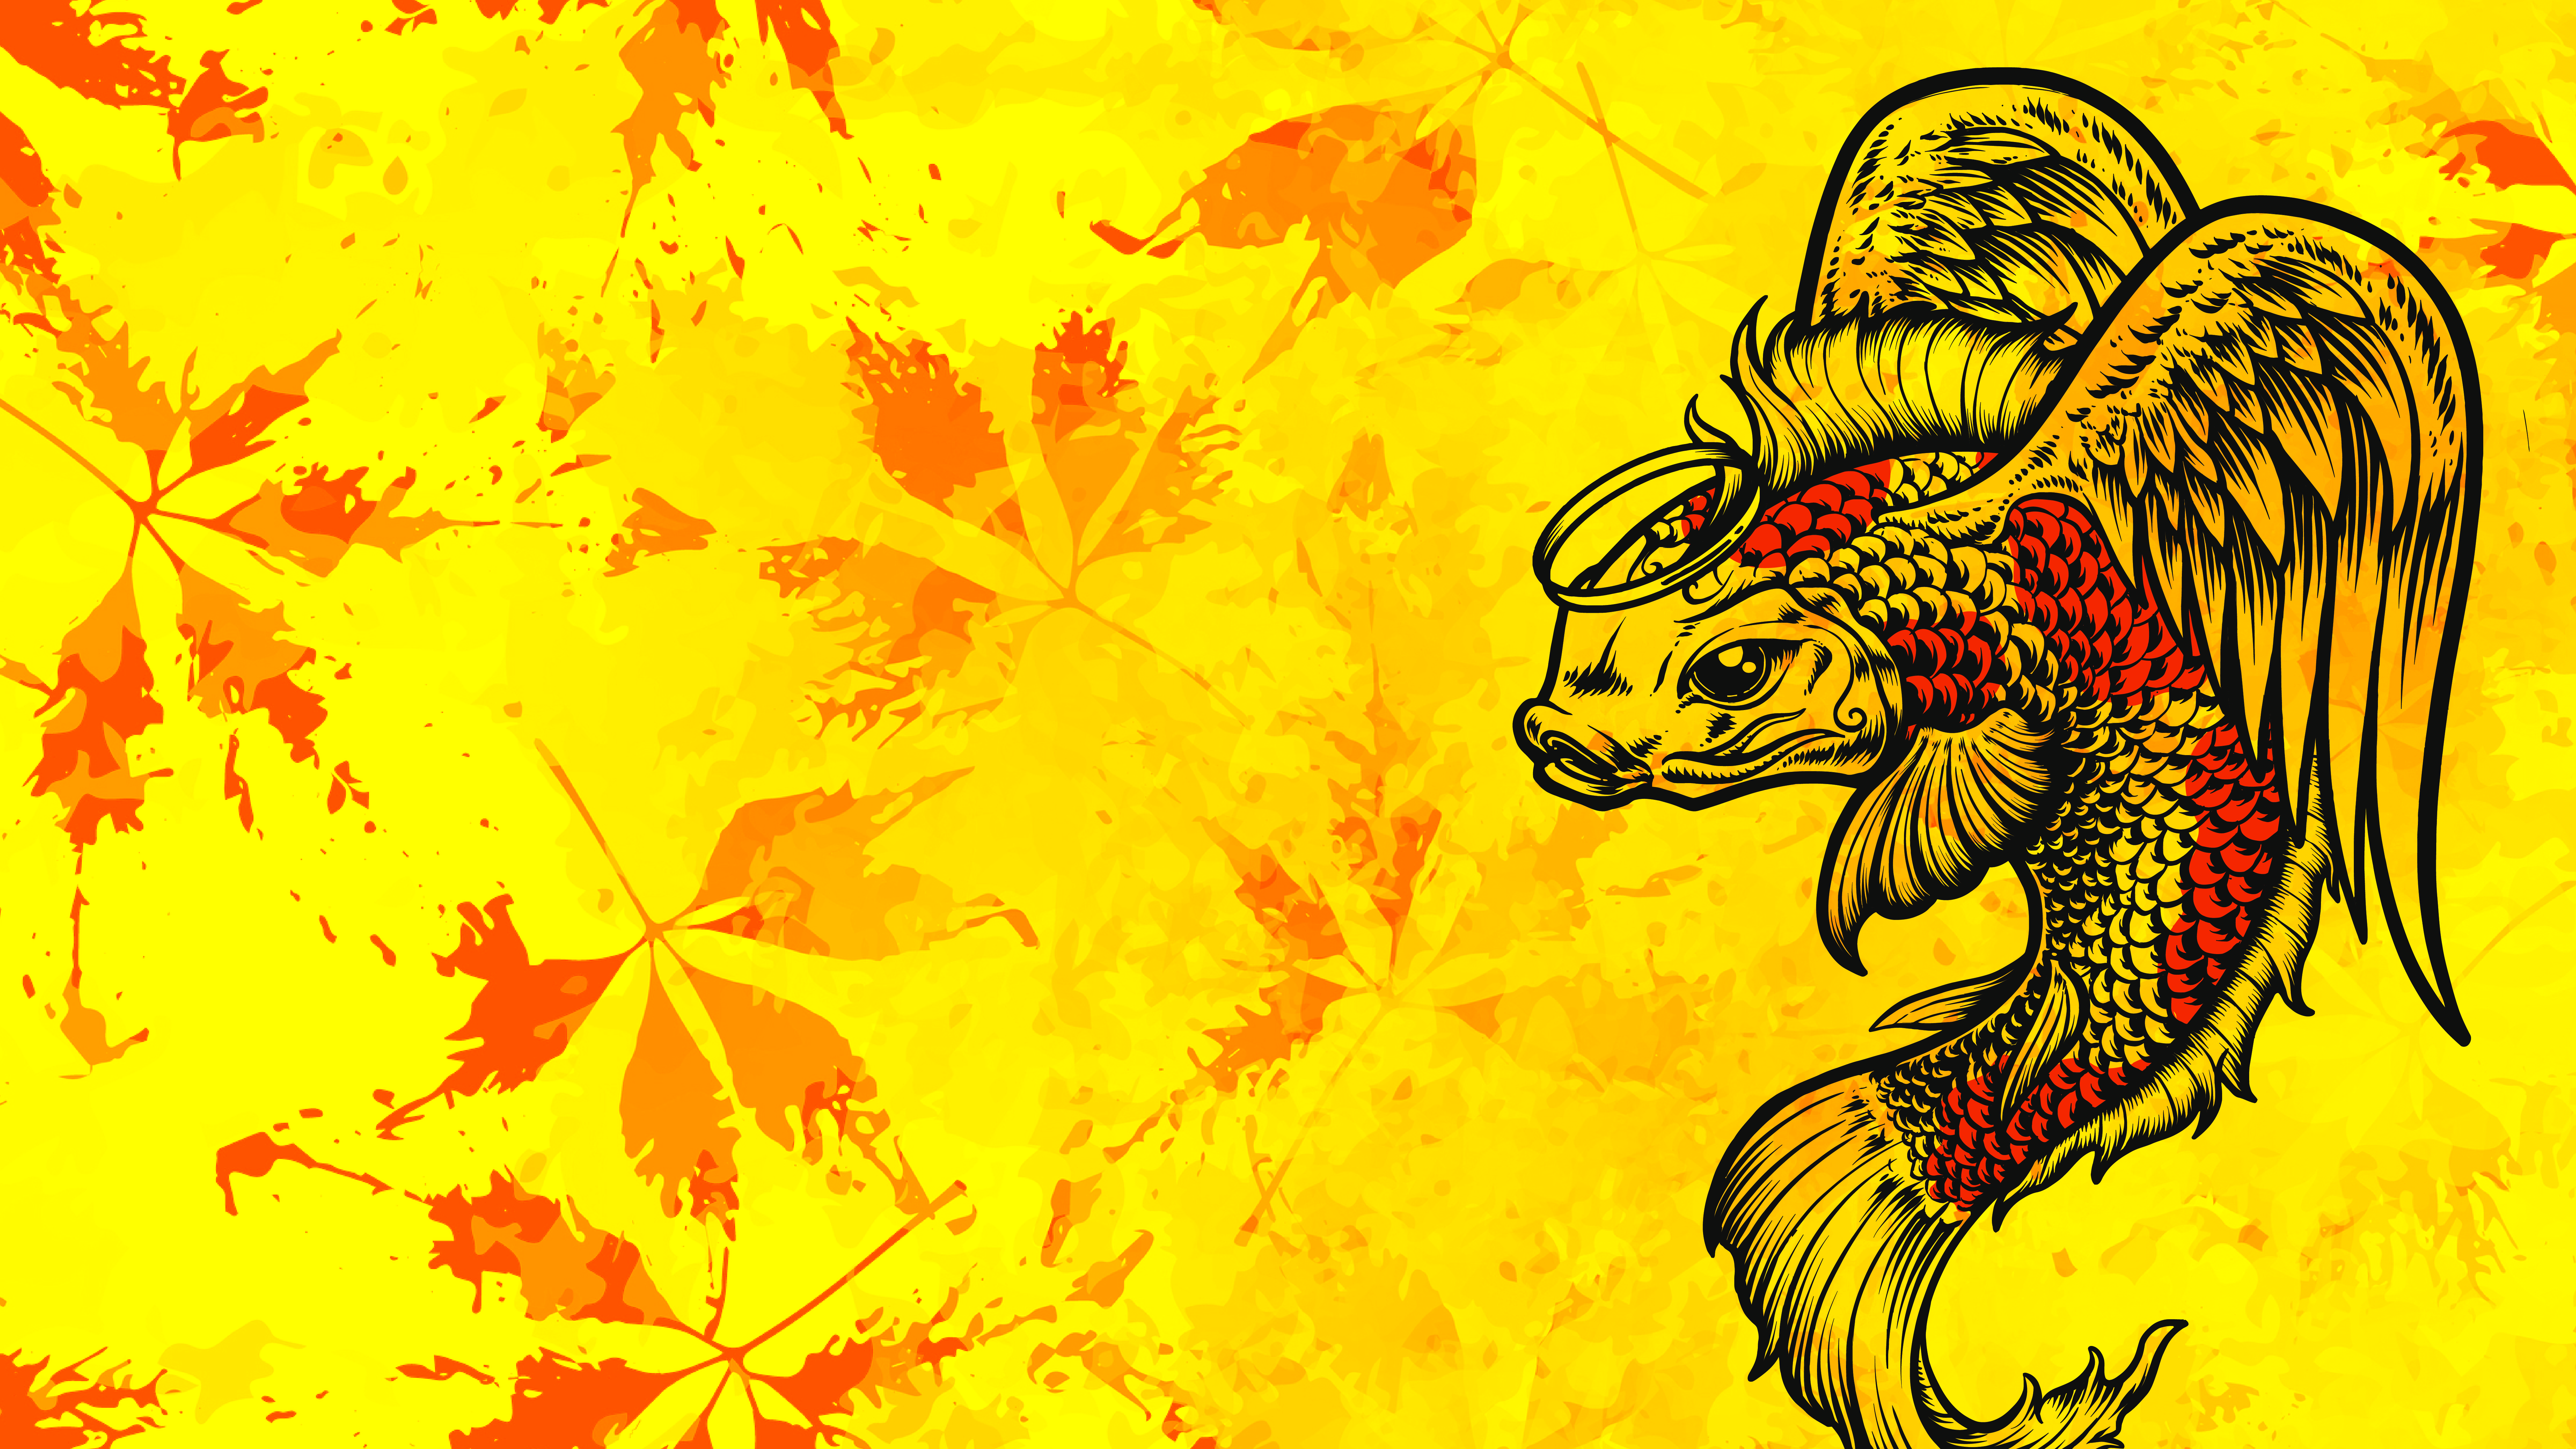 Enjoy vibrant pictures of koi fish with wings, depicted artistically against a bright yellow backdrop. The design also showcases beautiful autumn leaves.